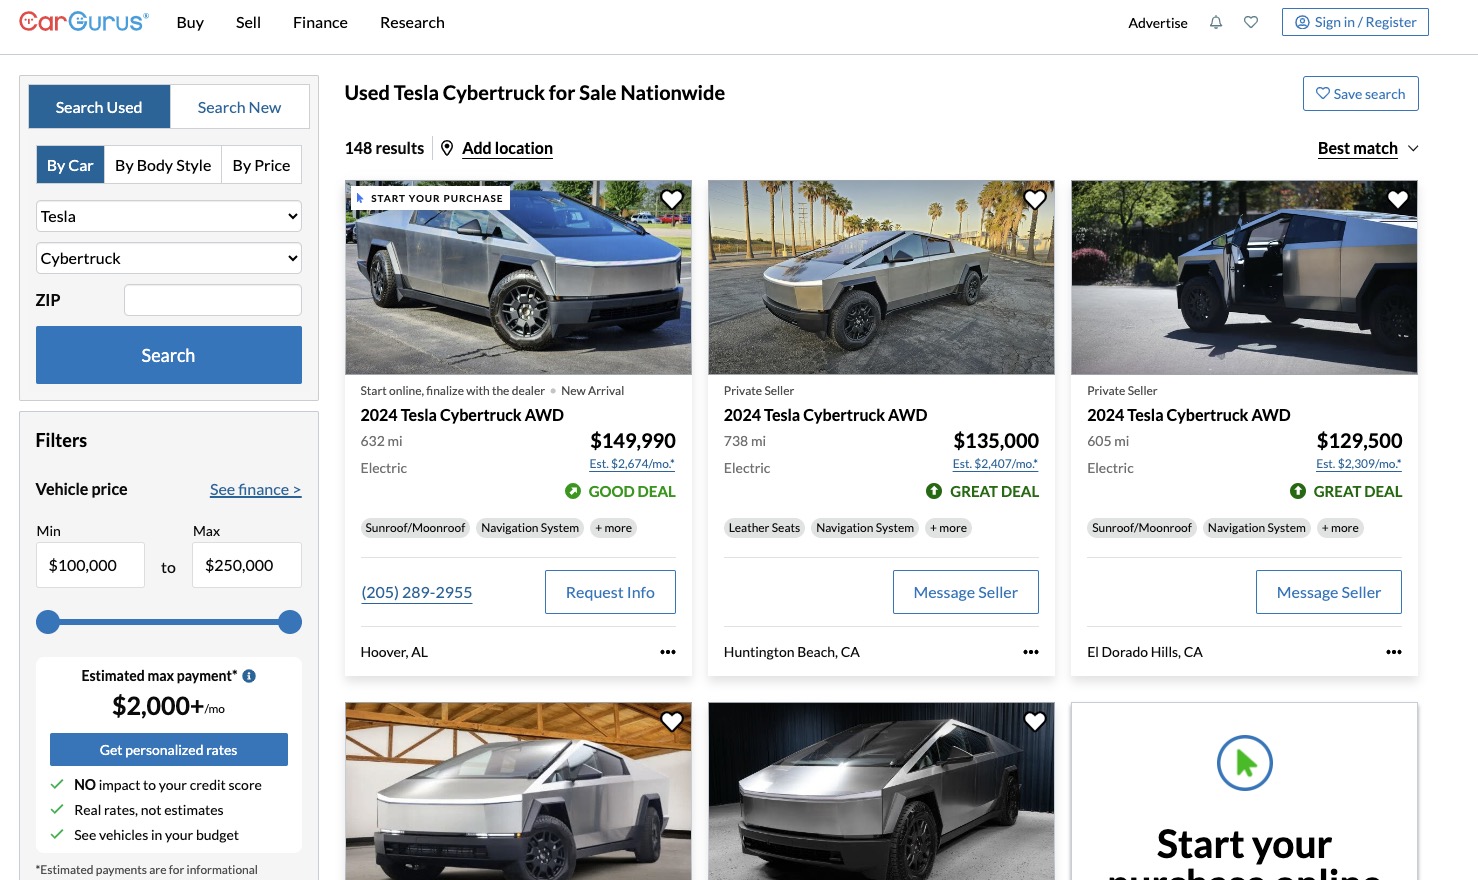 There are over 140 ‘used’ Tesla Cybertrucks for sale